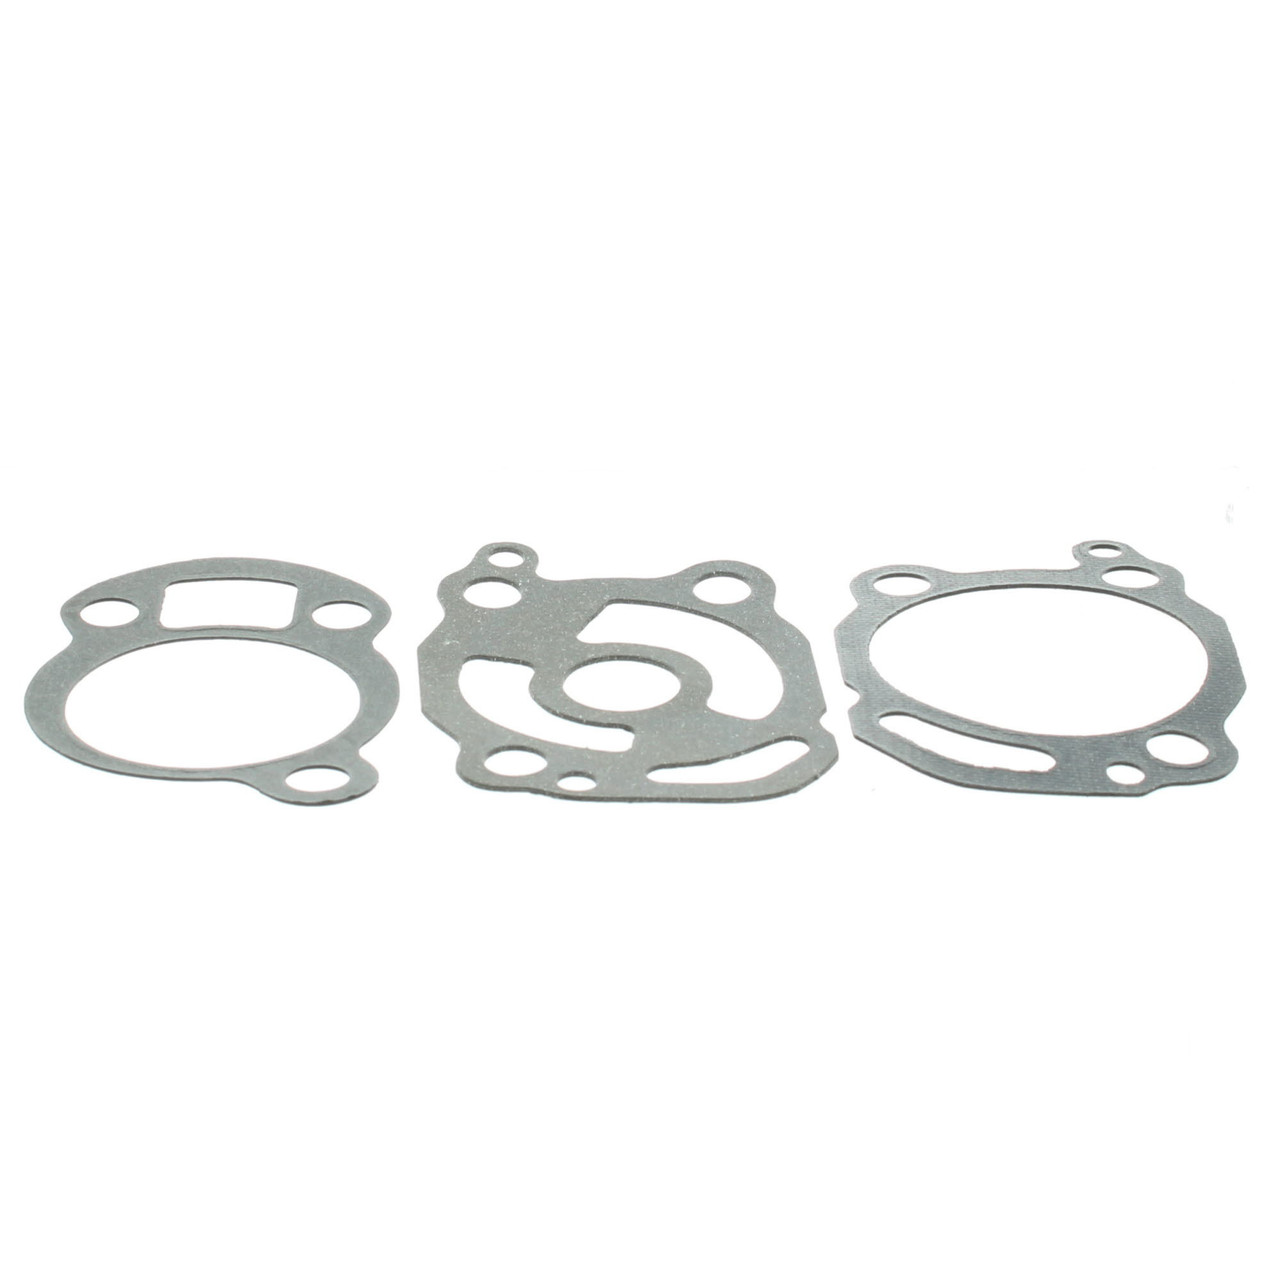 Mercury Marine/Mercruiser New OEM Lower Unit Seal Kit 20HP Outboards, 26-66303A1